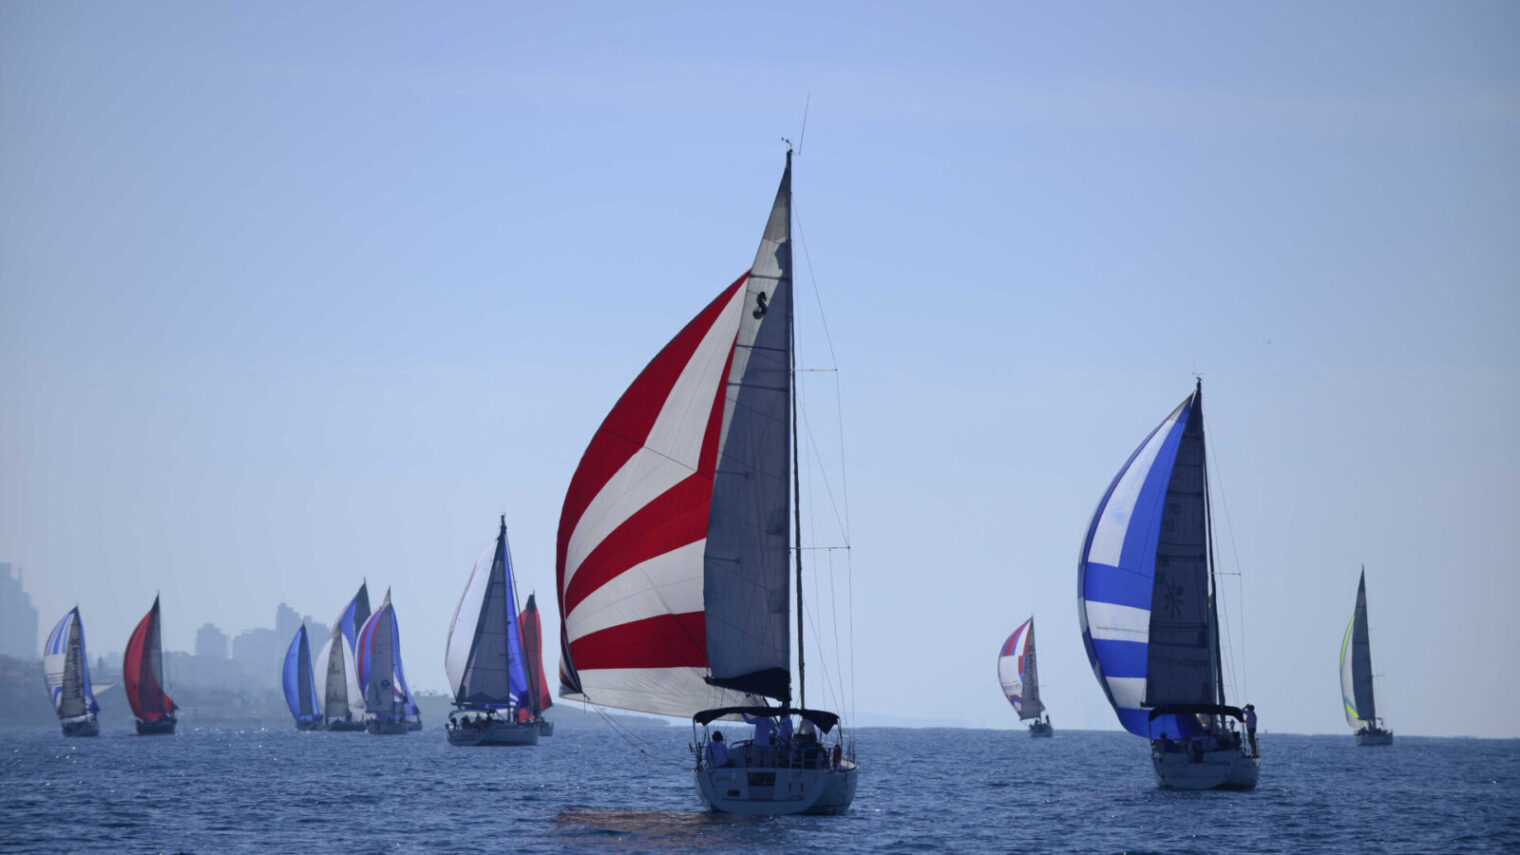 Sailors take to their yachts in an Israeli Sailing Competition along the Tel-Aviv shoreline. Photo by Tomer Neuberg/Flash90